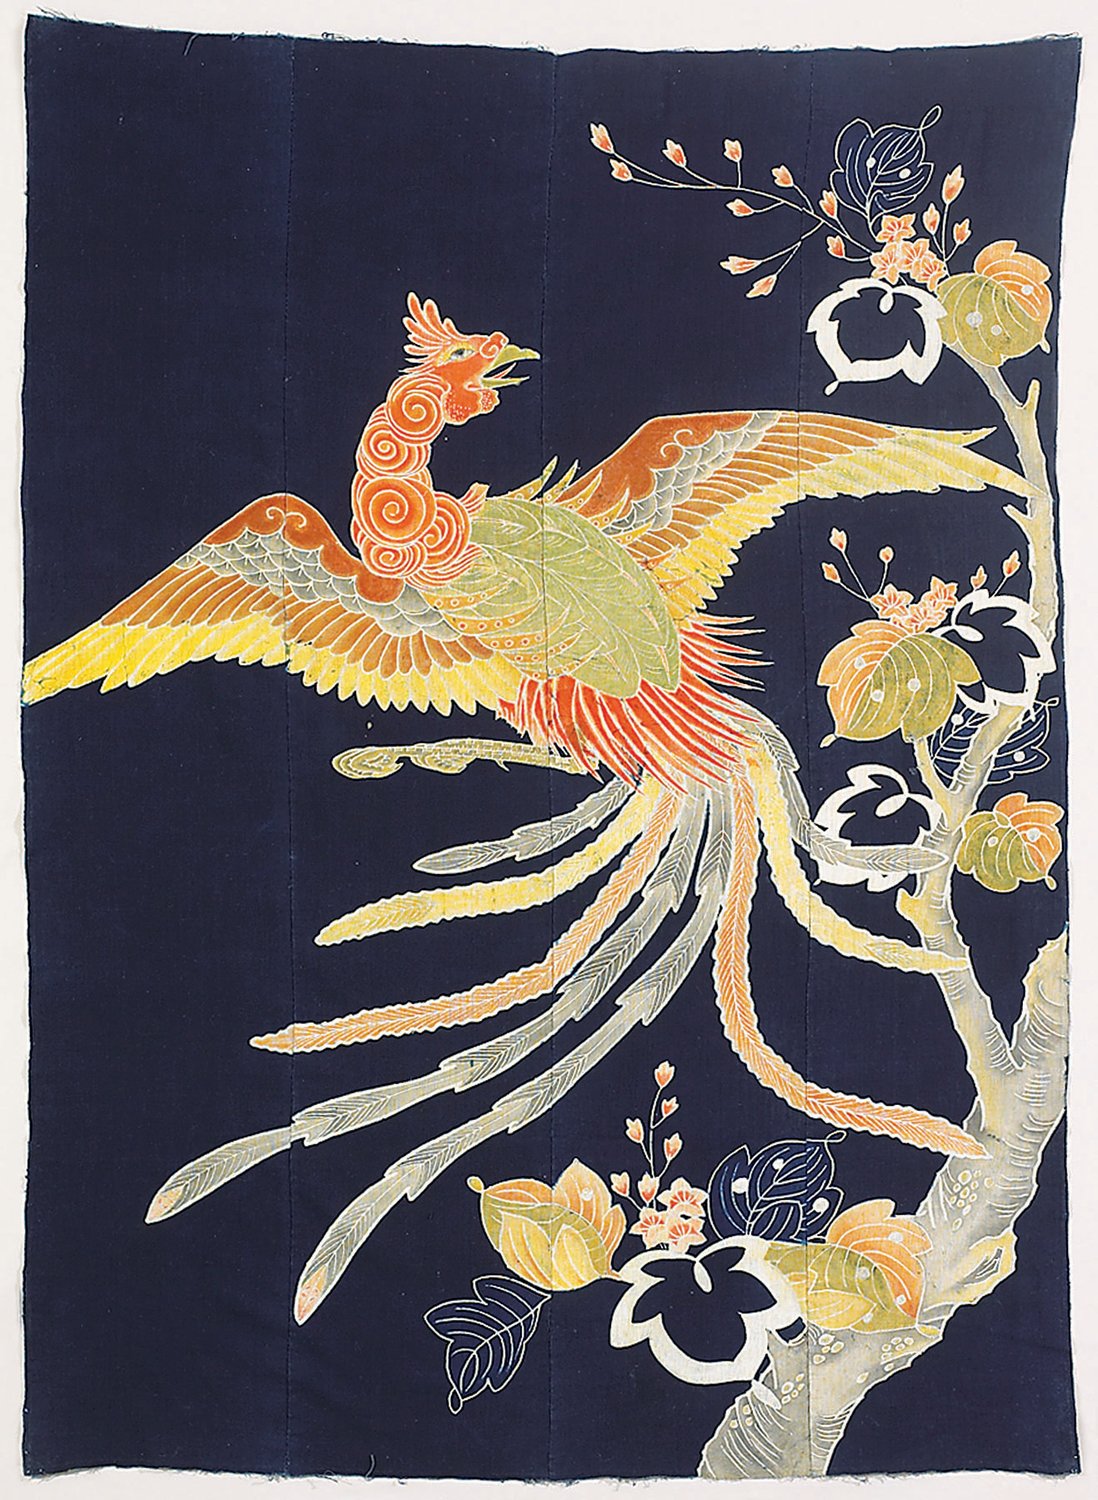 From “Sleep Tight,” a Japanese, Futon Cover, late 1800s, cotton plain weave with tsutsugaki (tubework resist dyed and painted decoration). Allentown Art Museum: purchase, gift of Kate Fowler Merle-Smith by Exchange.